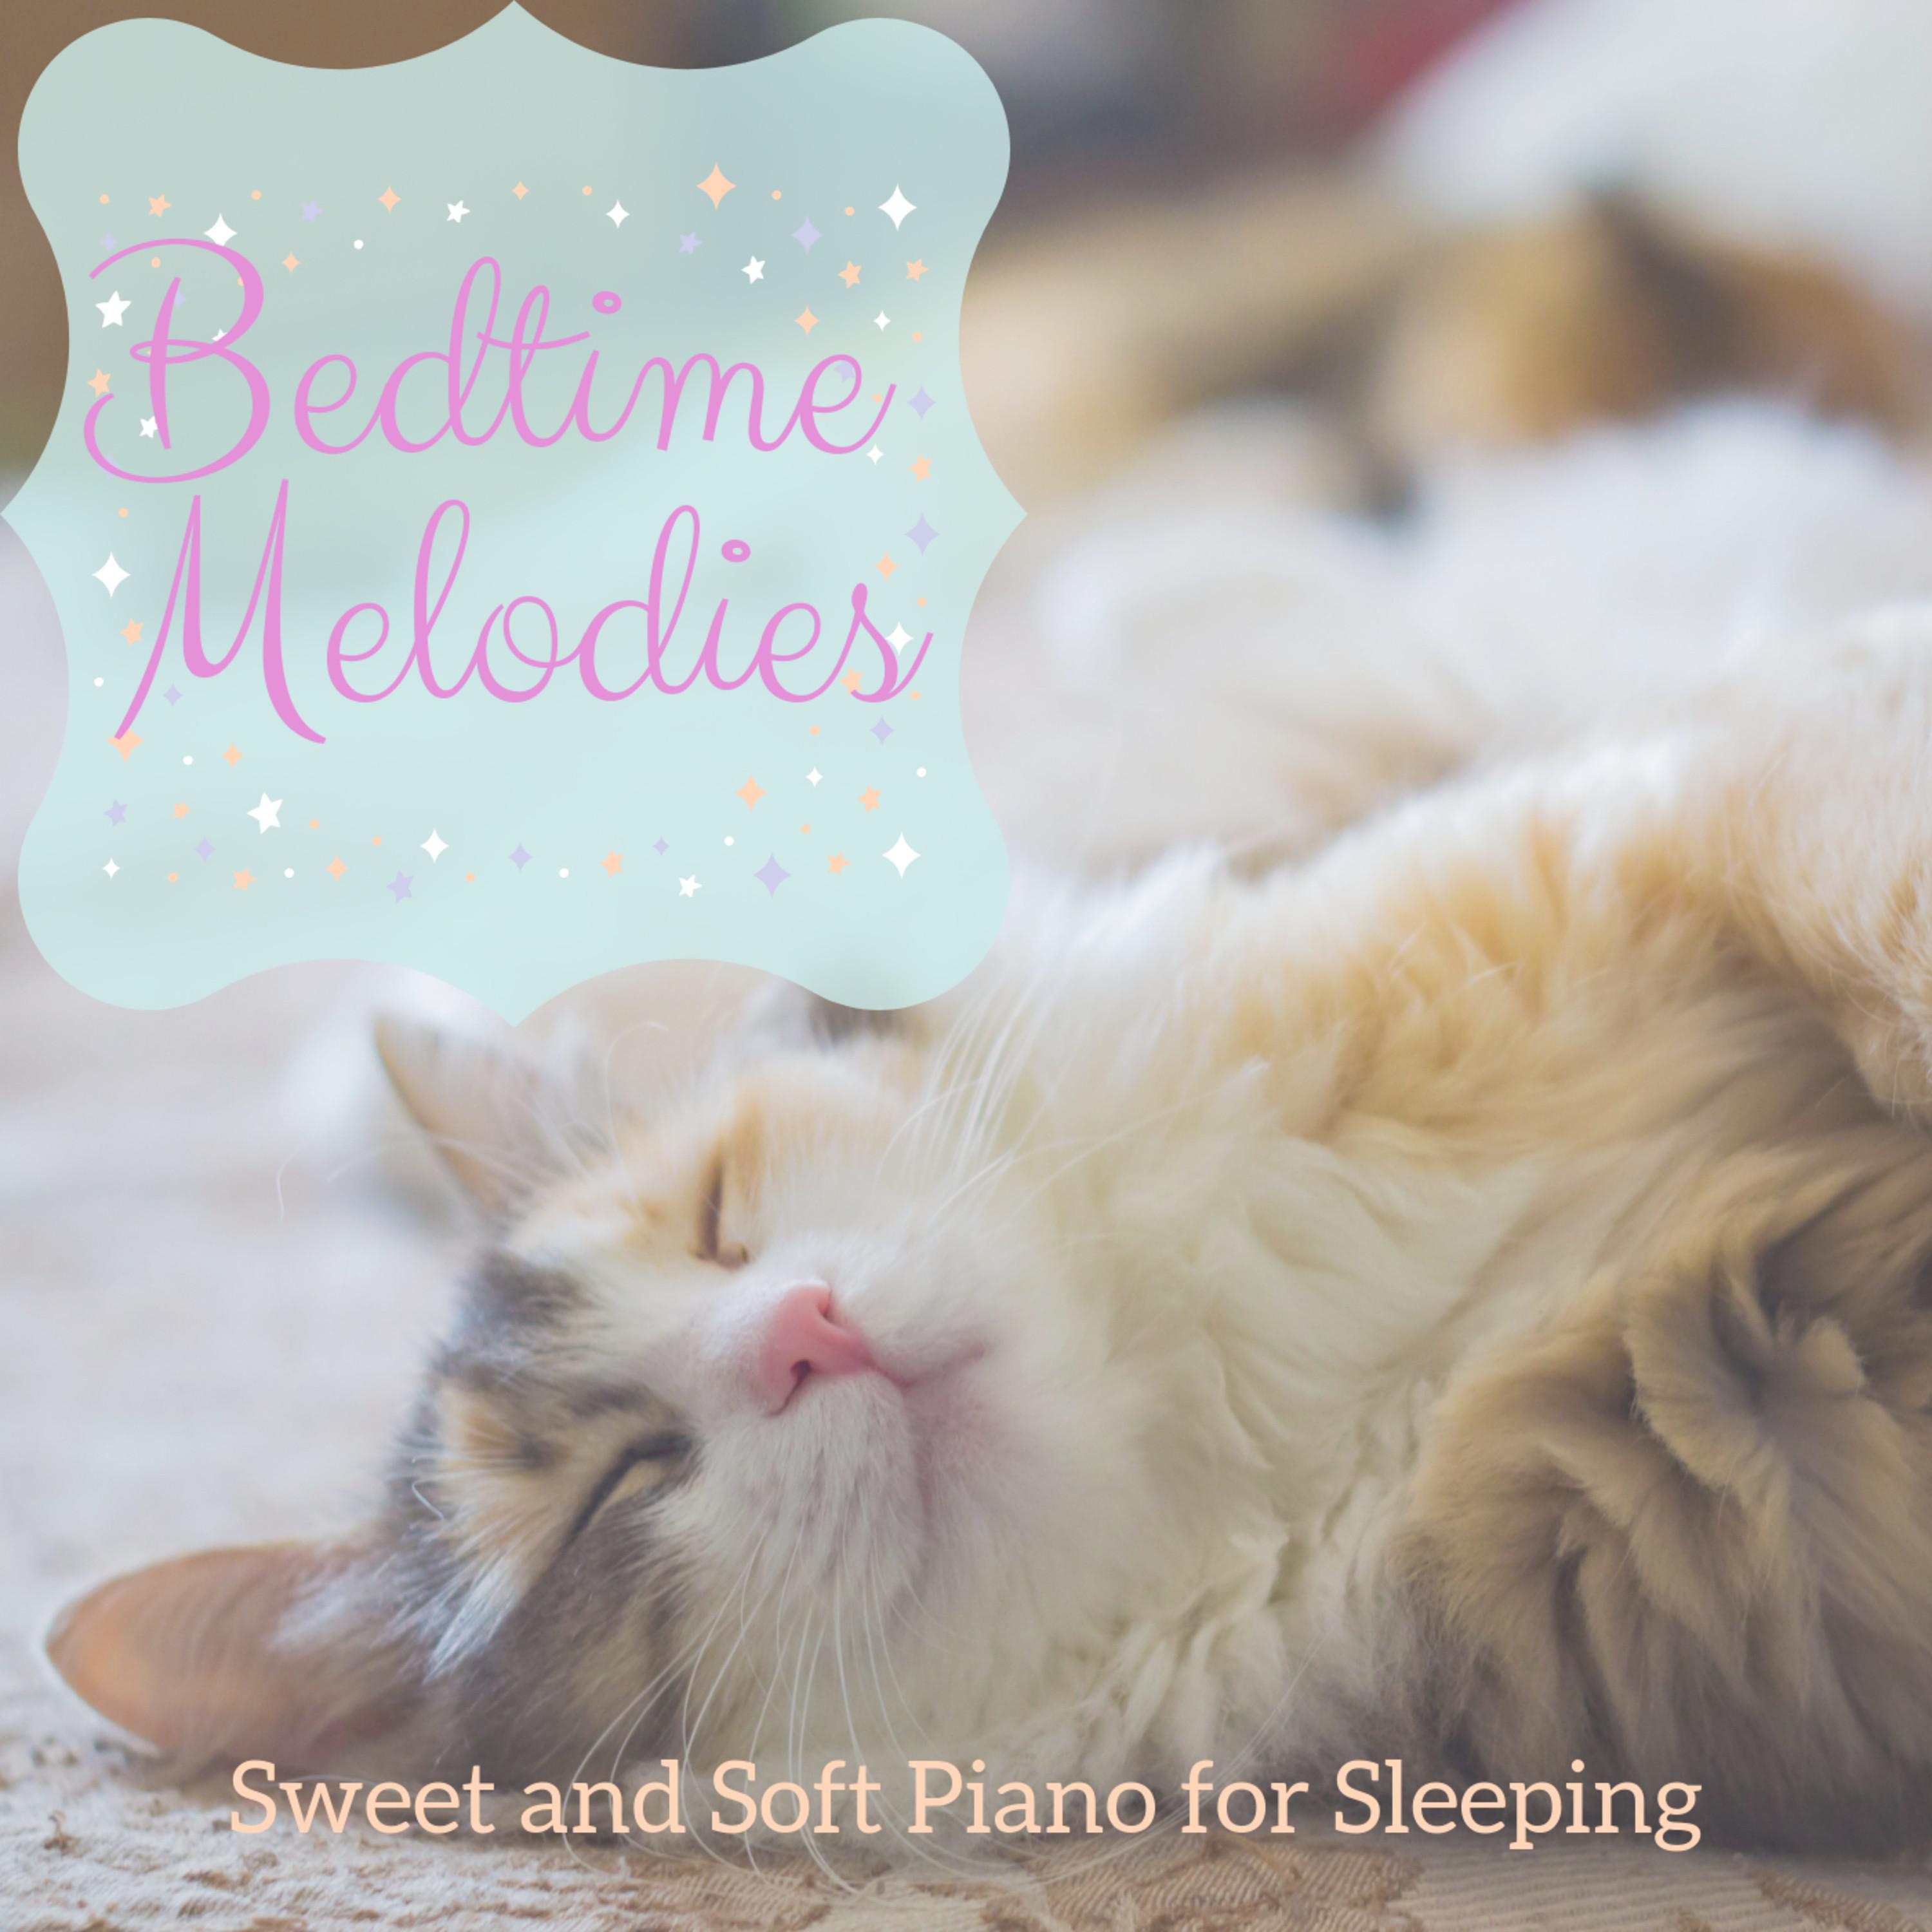 Bedtime Melodies - Sweet and Soft Piano for Sleeping专辑